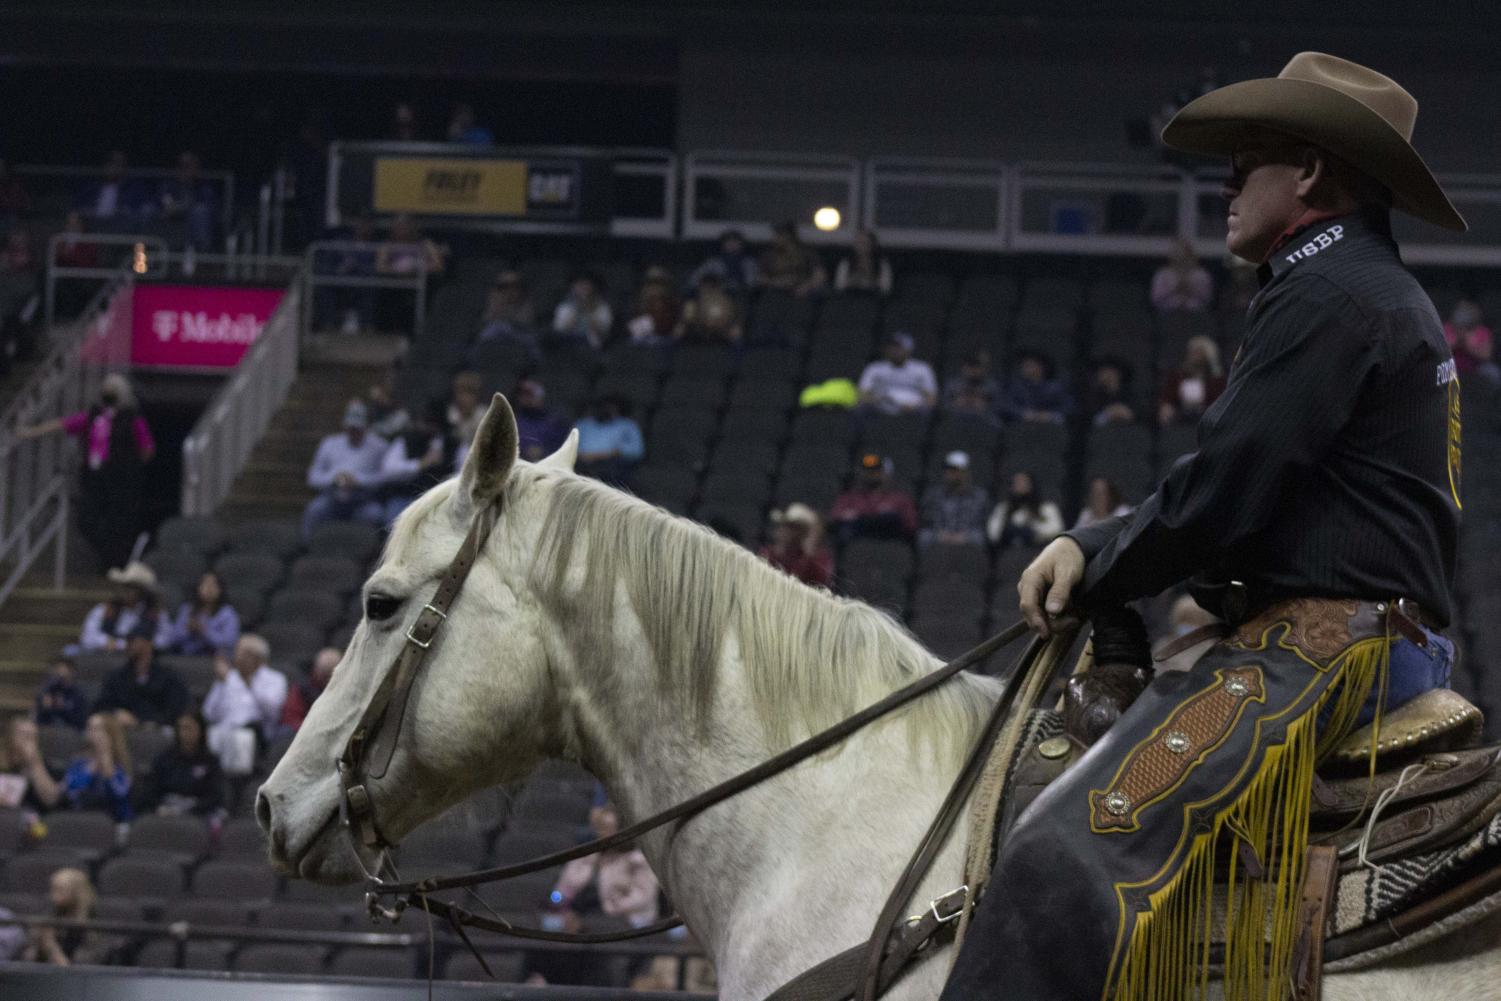 Cowboys+%26+Covid-19%3A+Professional+Bull+Riding+Event+Hosted+in+Kansas+City